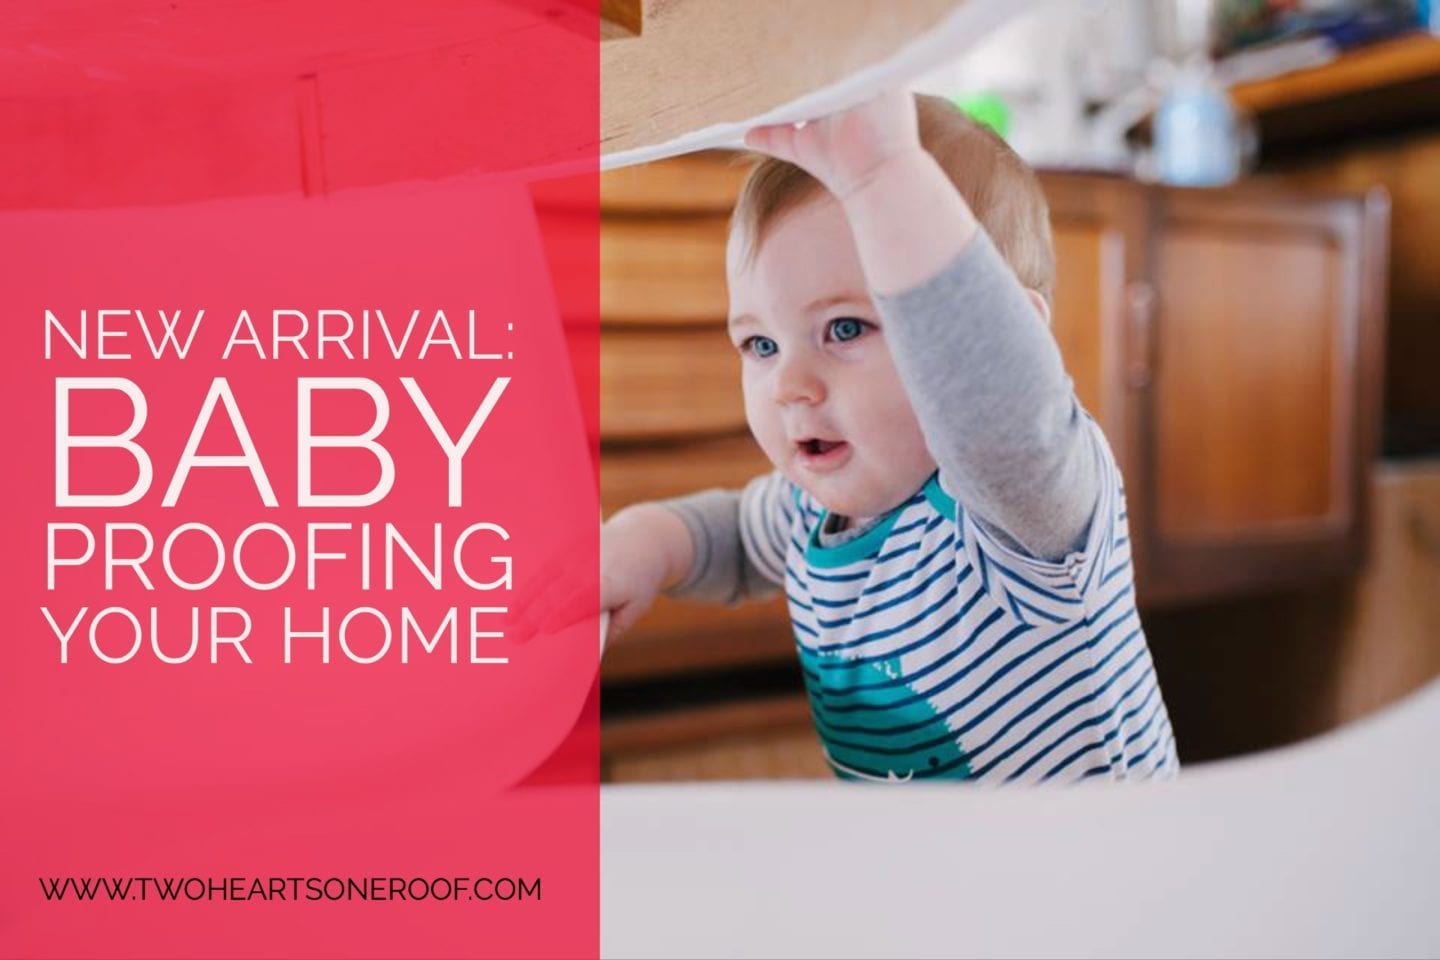 New Arrival: Baby Proofing Your Home